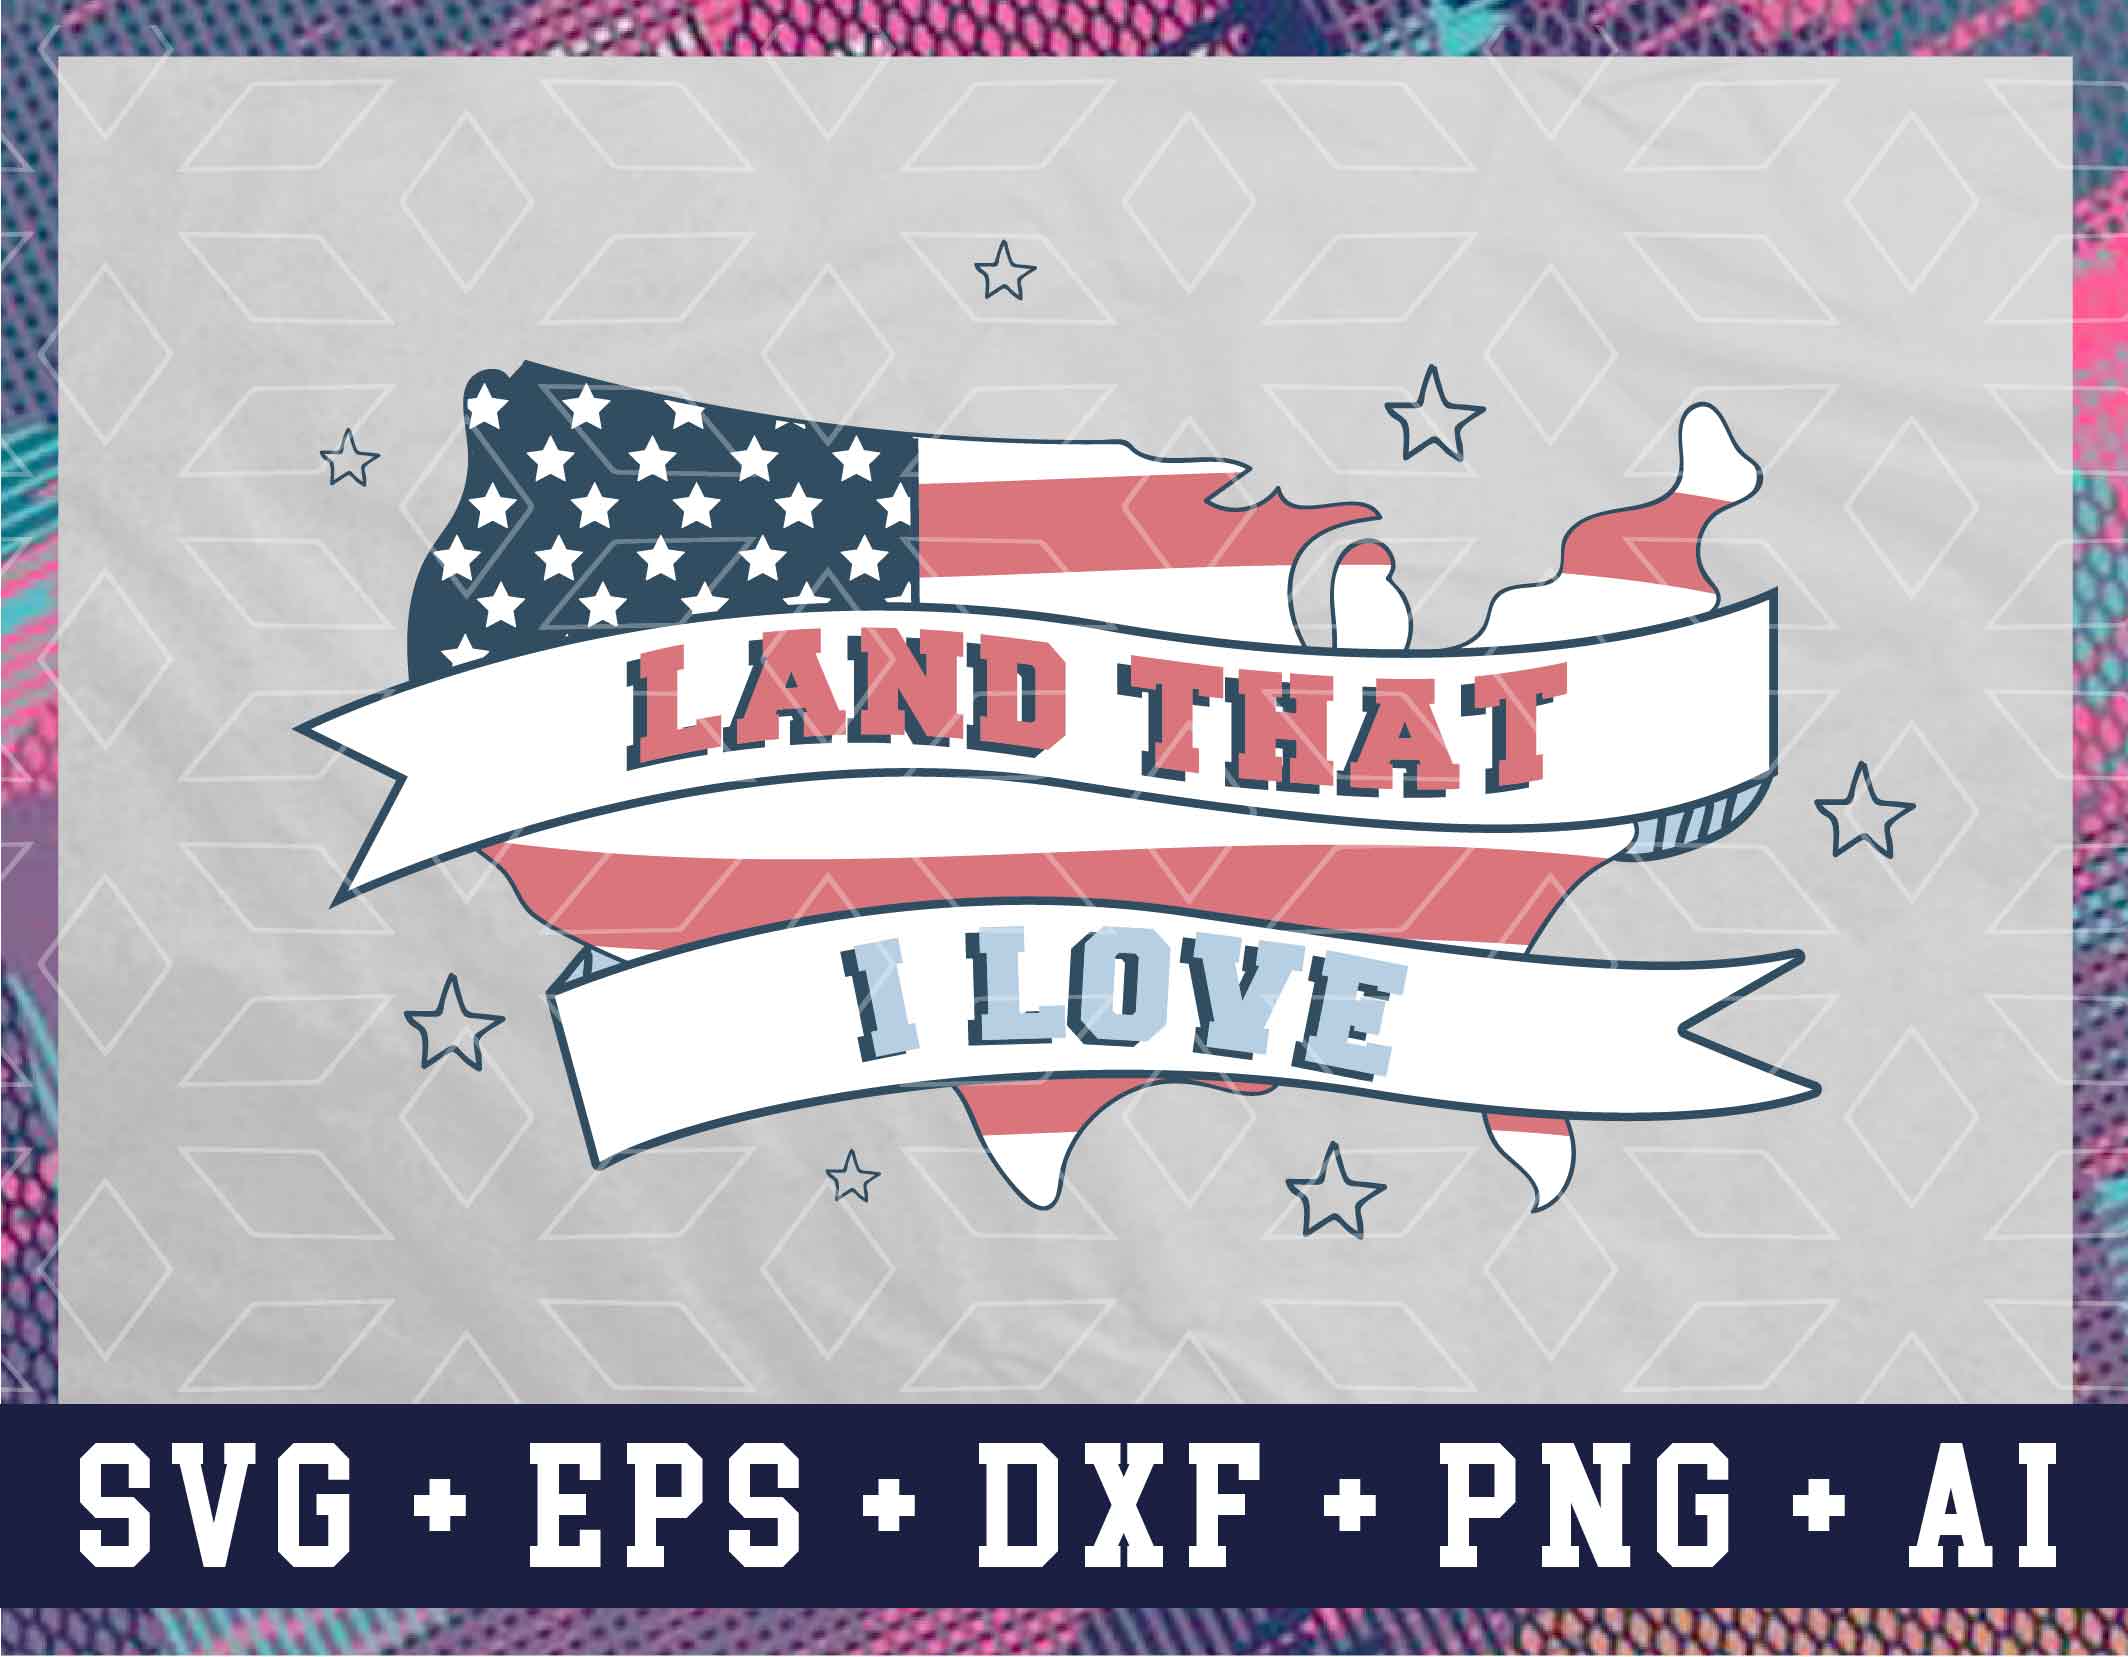 font 2 01 41 4th of July Sublimations, Designs Downloads, 4th of July, Png, Clipart, Shirt Design Sublimation Downloads, July 4th, Land That I Love